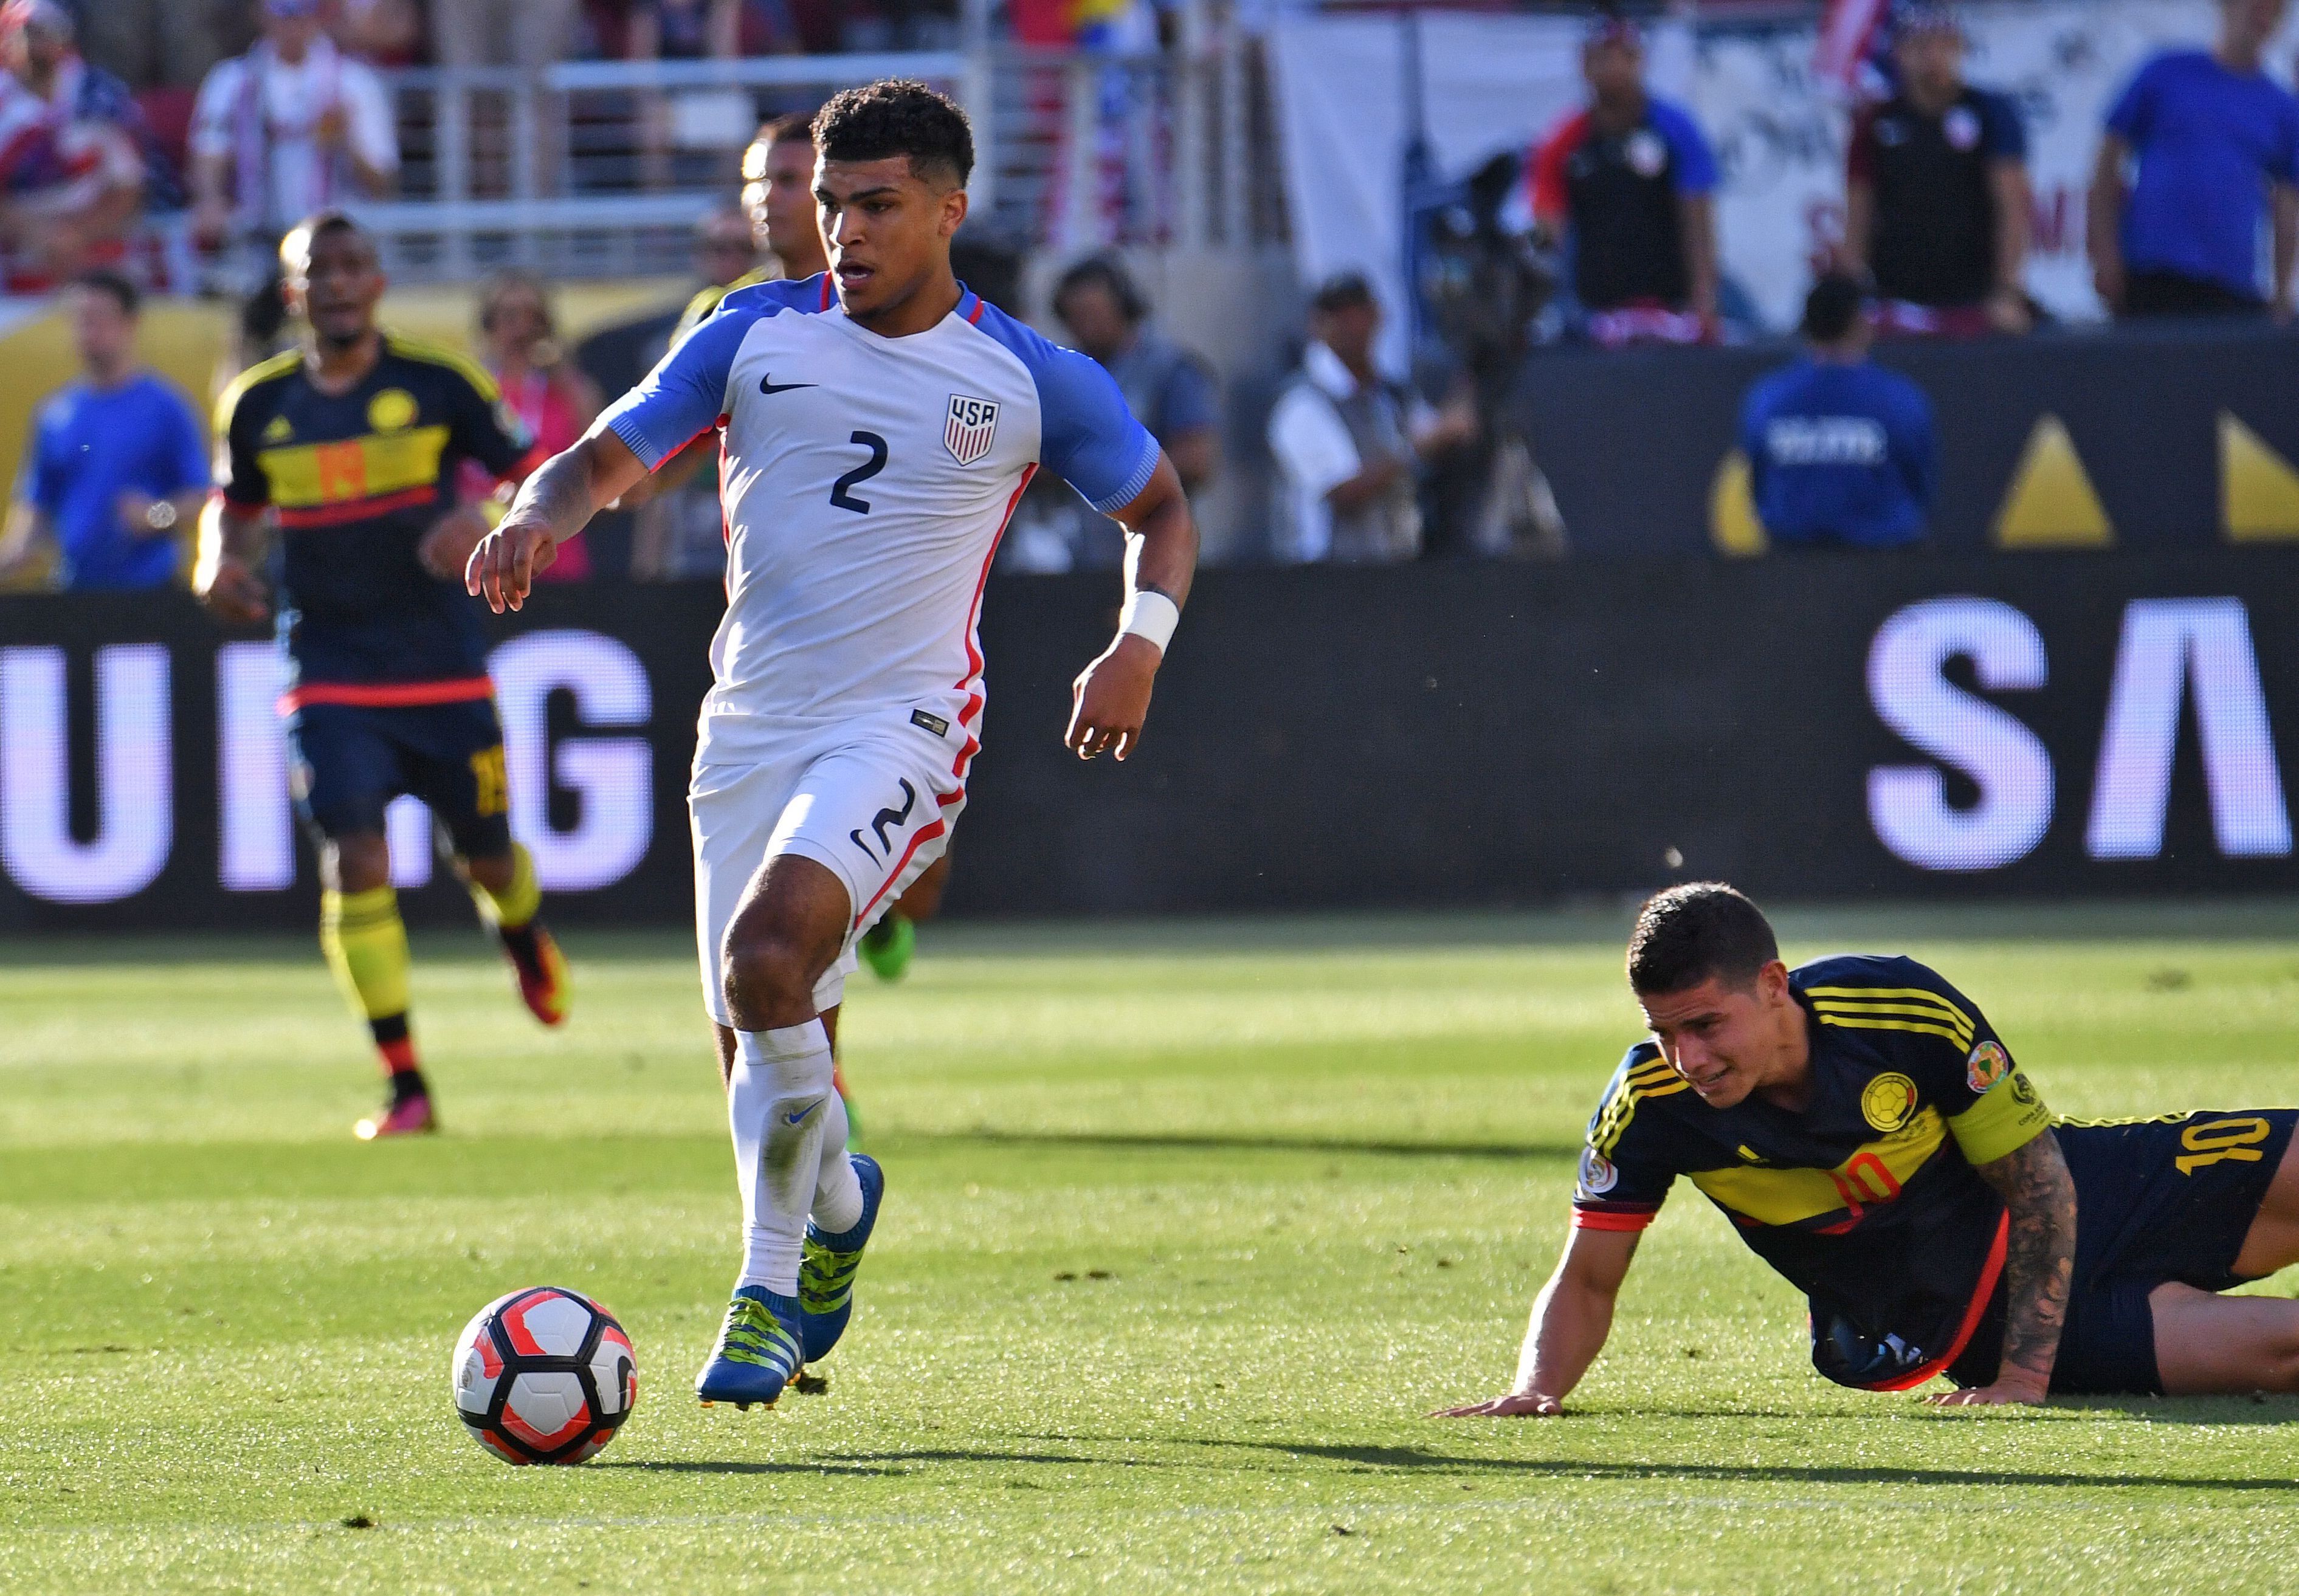 USA vs. Costa Rica time, USA vs. Costa Rica date, USA vs. Costa Rica tv channel, USA vs. Costa Rica, usa next game, usa next match, usmnt next game, USA vs. Costa Rica odds, copa america teams, USA vs. Costa Rica preview, when does usa play next,